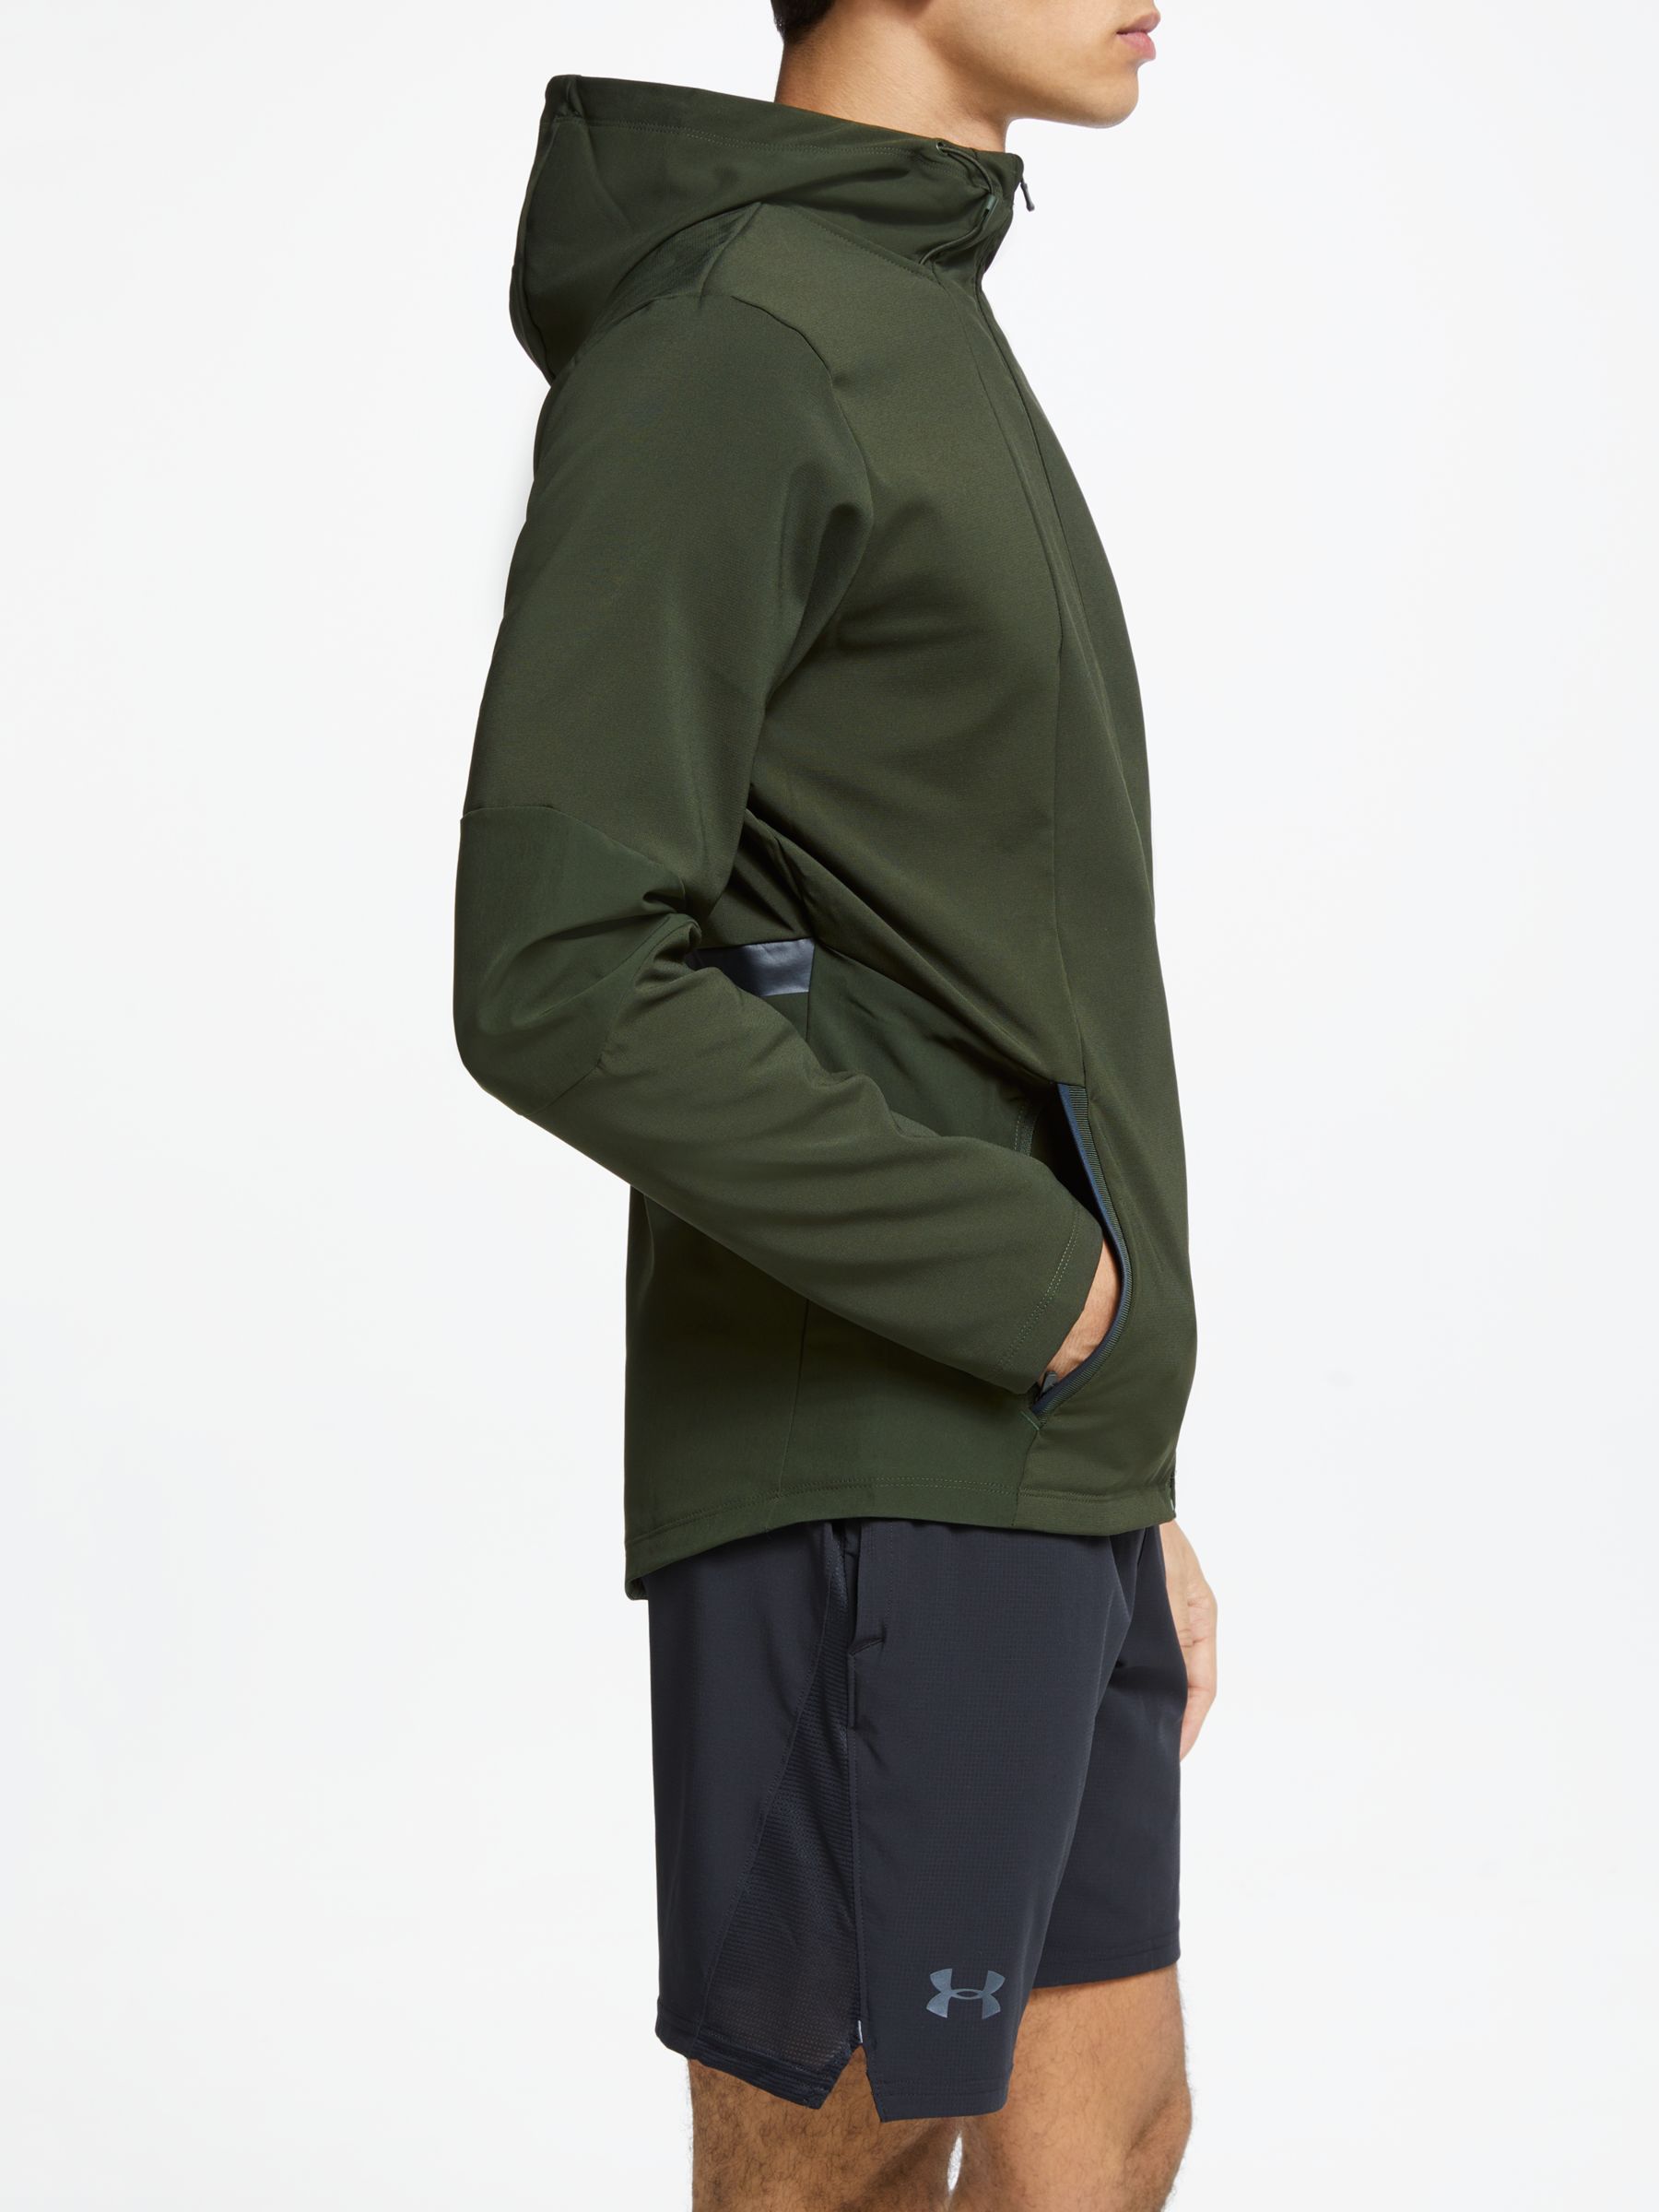 under armour storm jacket green